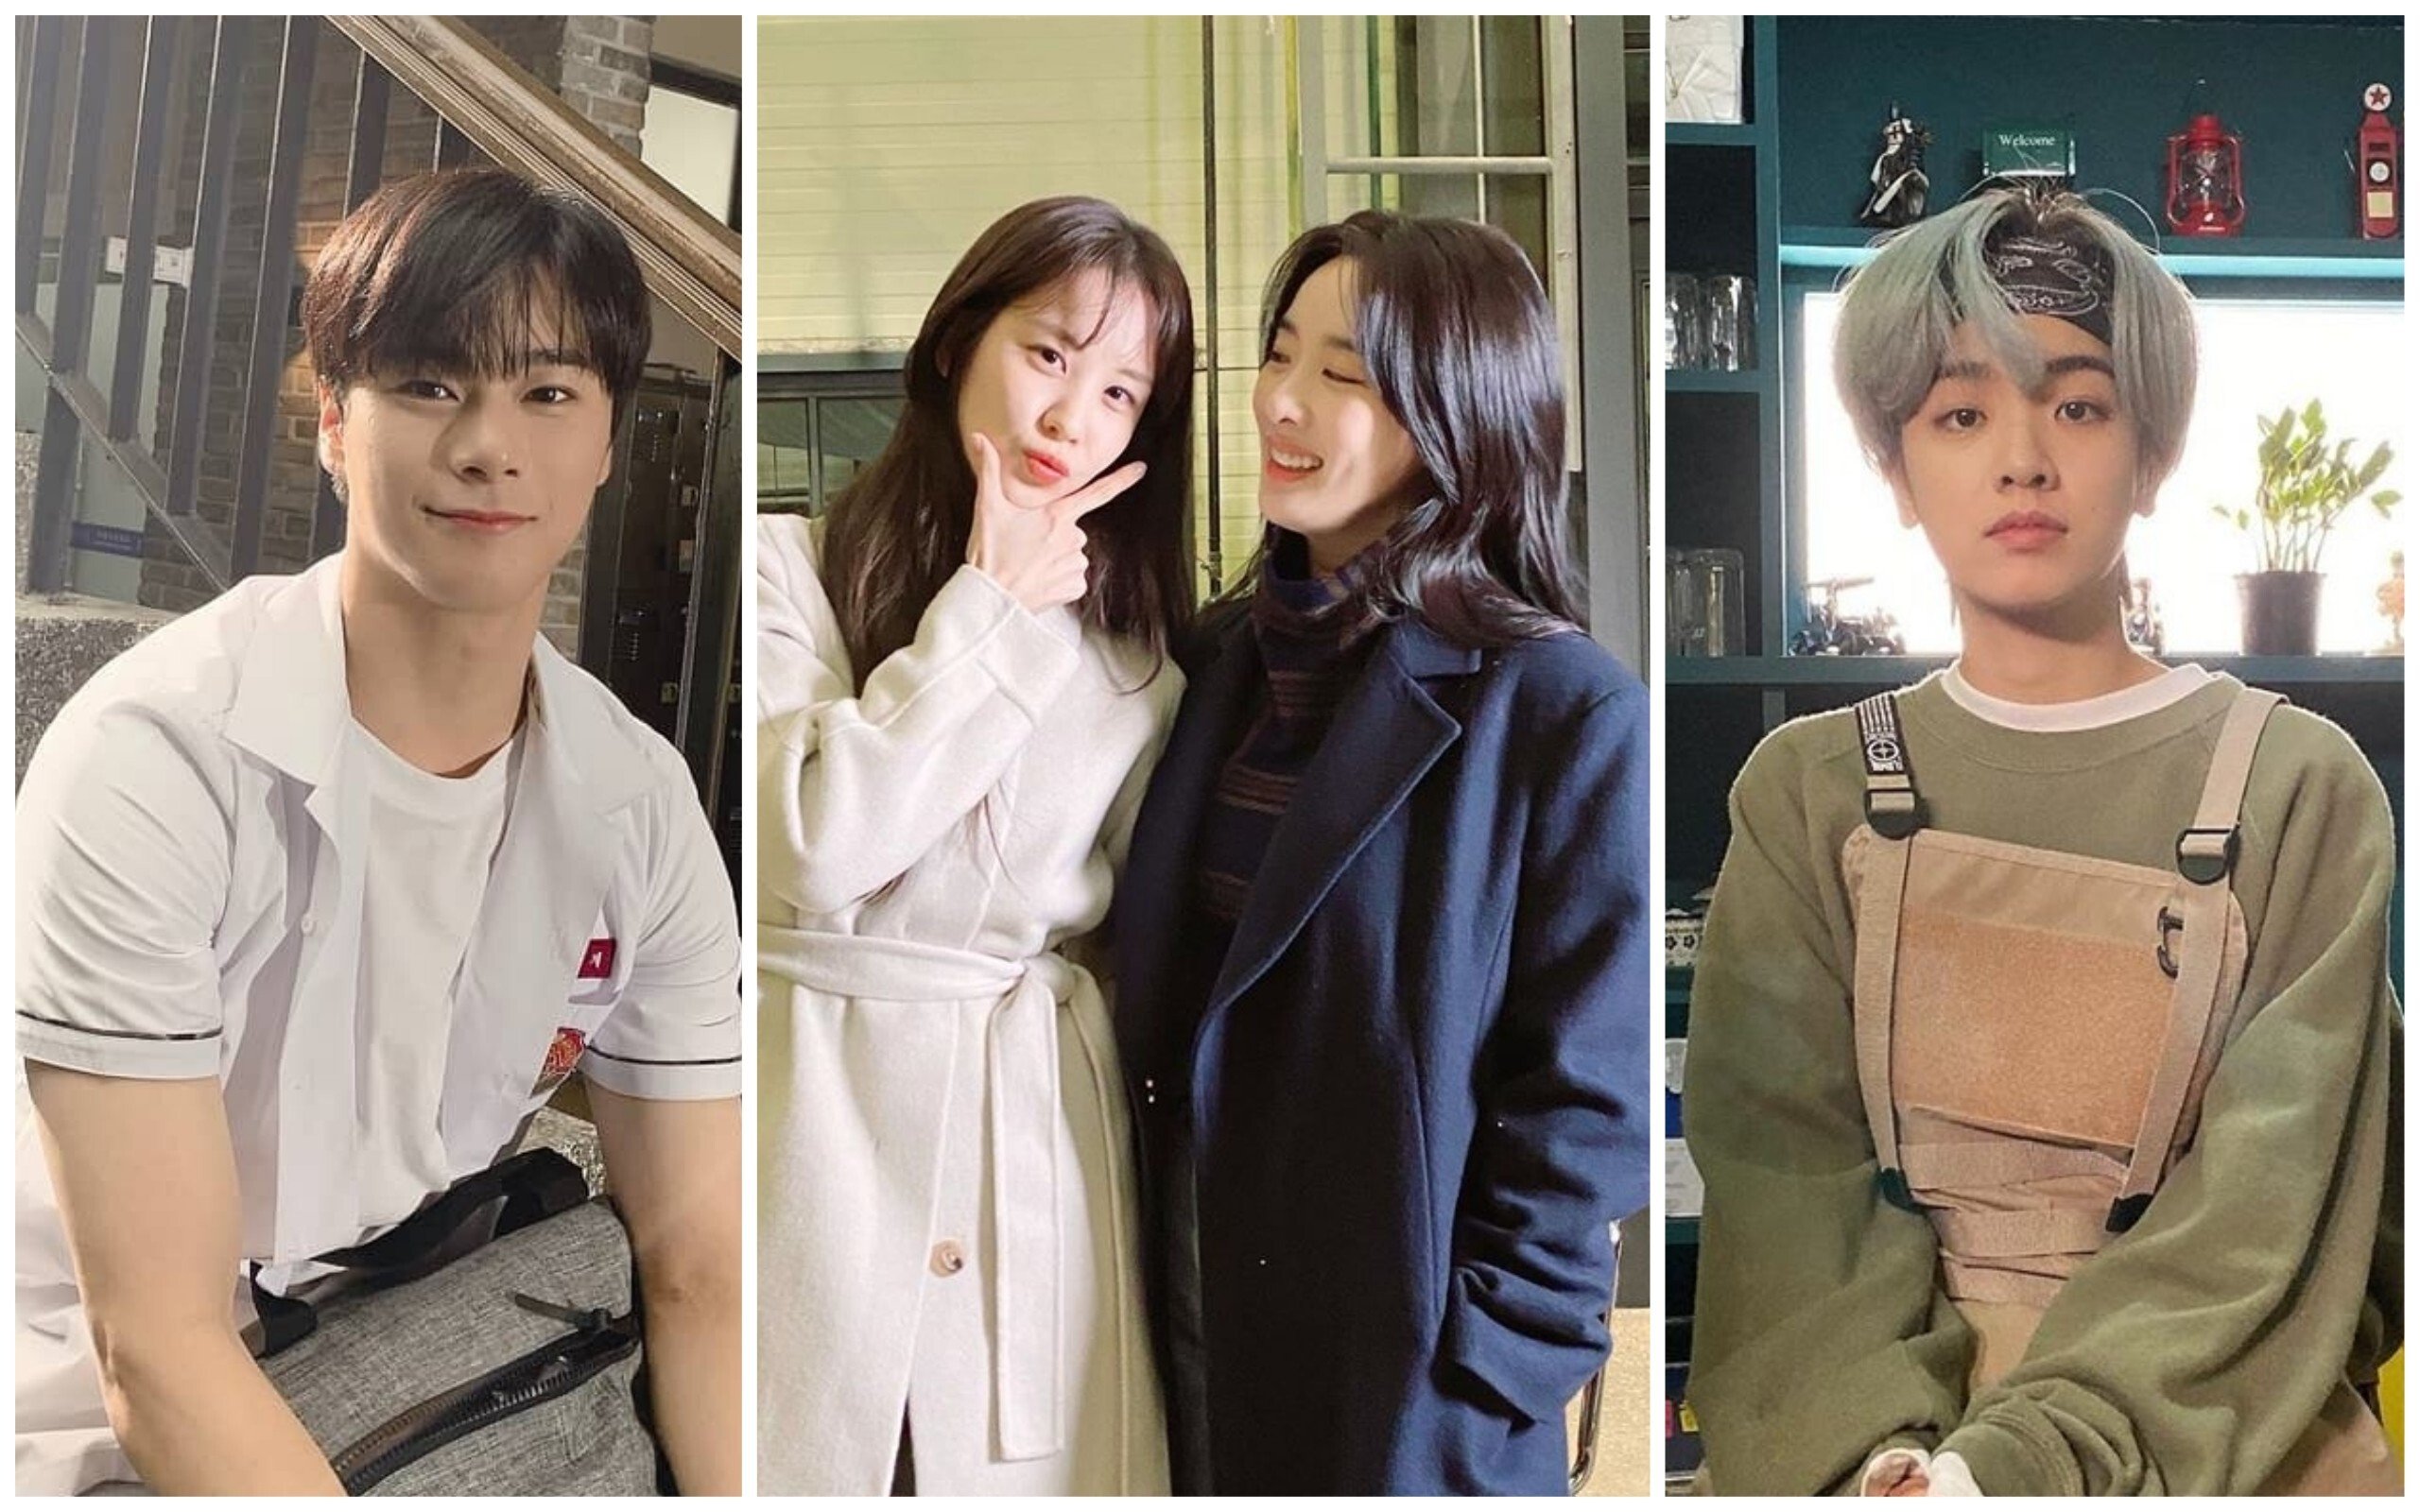 Korean drama actors Moon Bin, Seohyun and Lee Chung-ah and Lee Joo-young have all portrayed LGBT characters on screen. Photo: Instagram